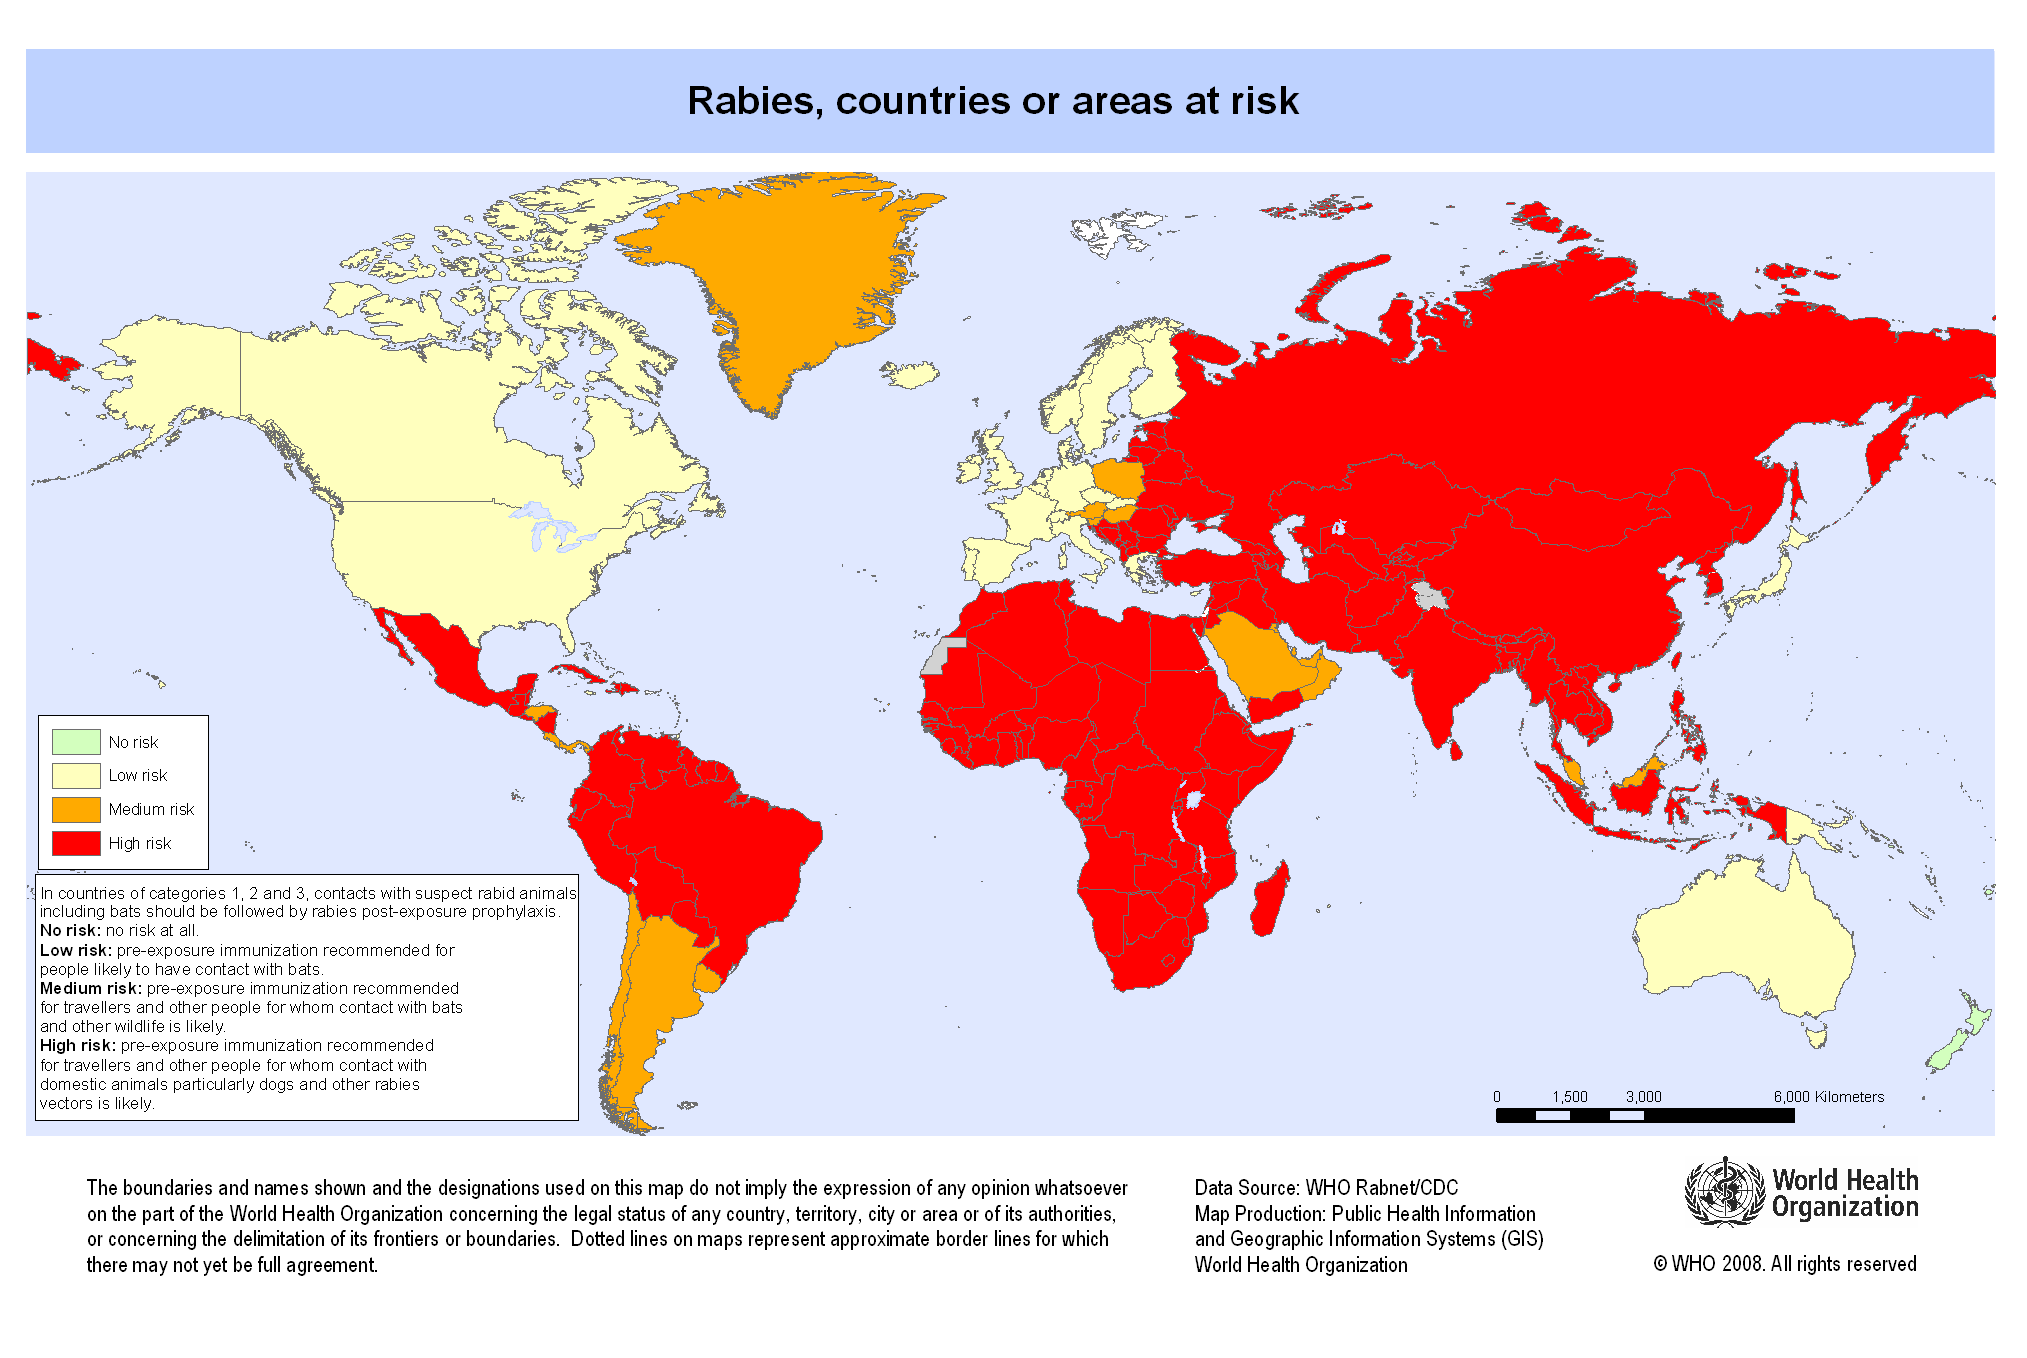 Areas of risk for Rabies